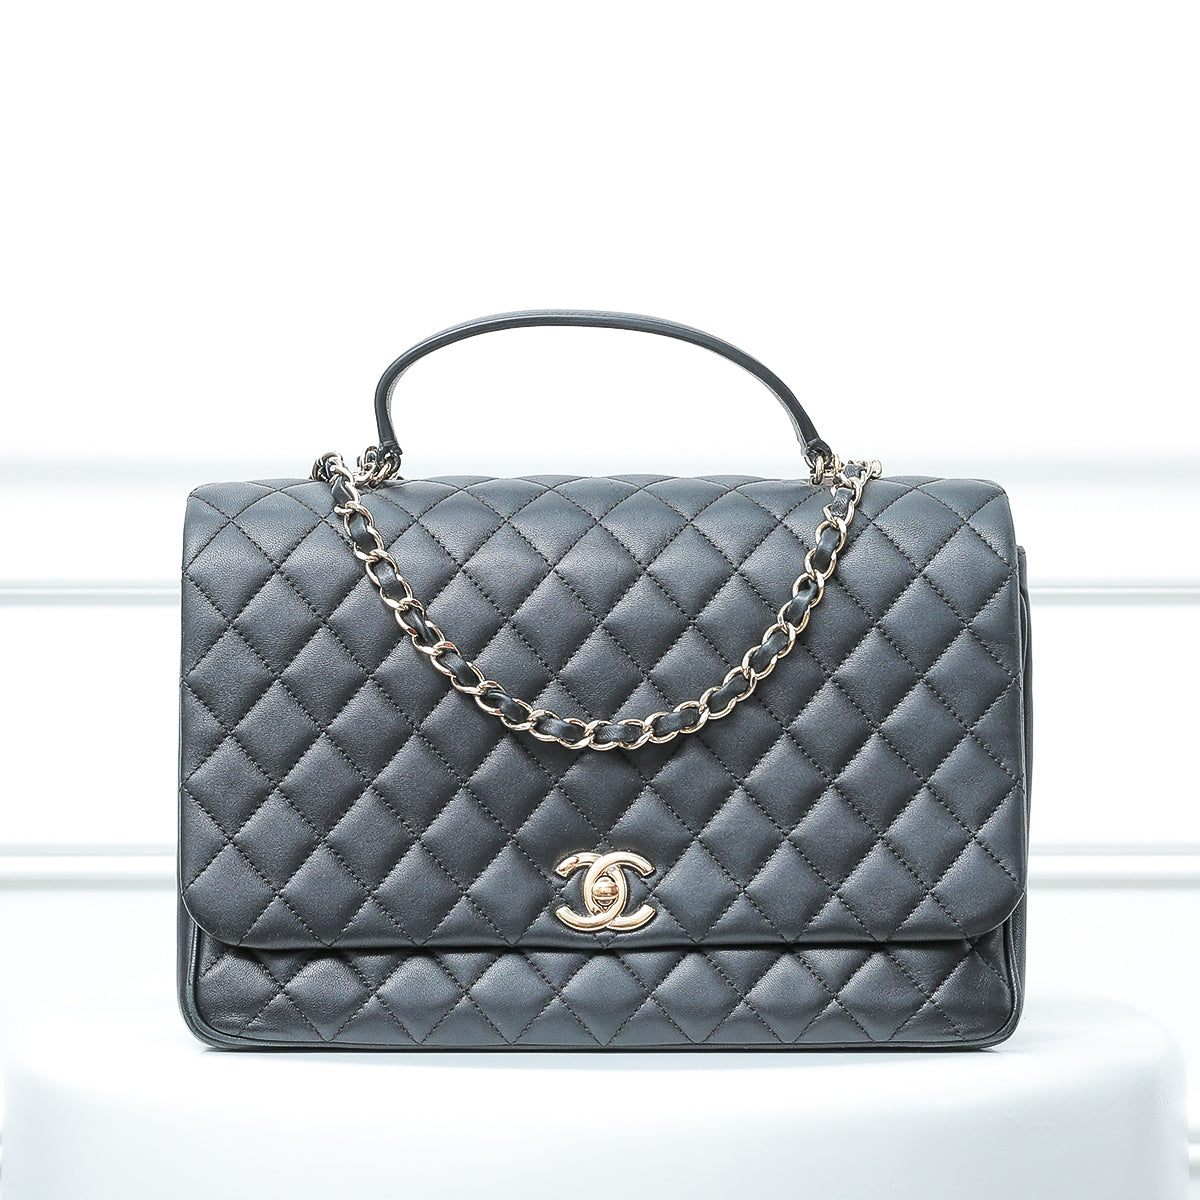 Chanel Black Quilted Top Handle Bag